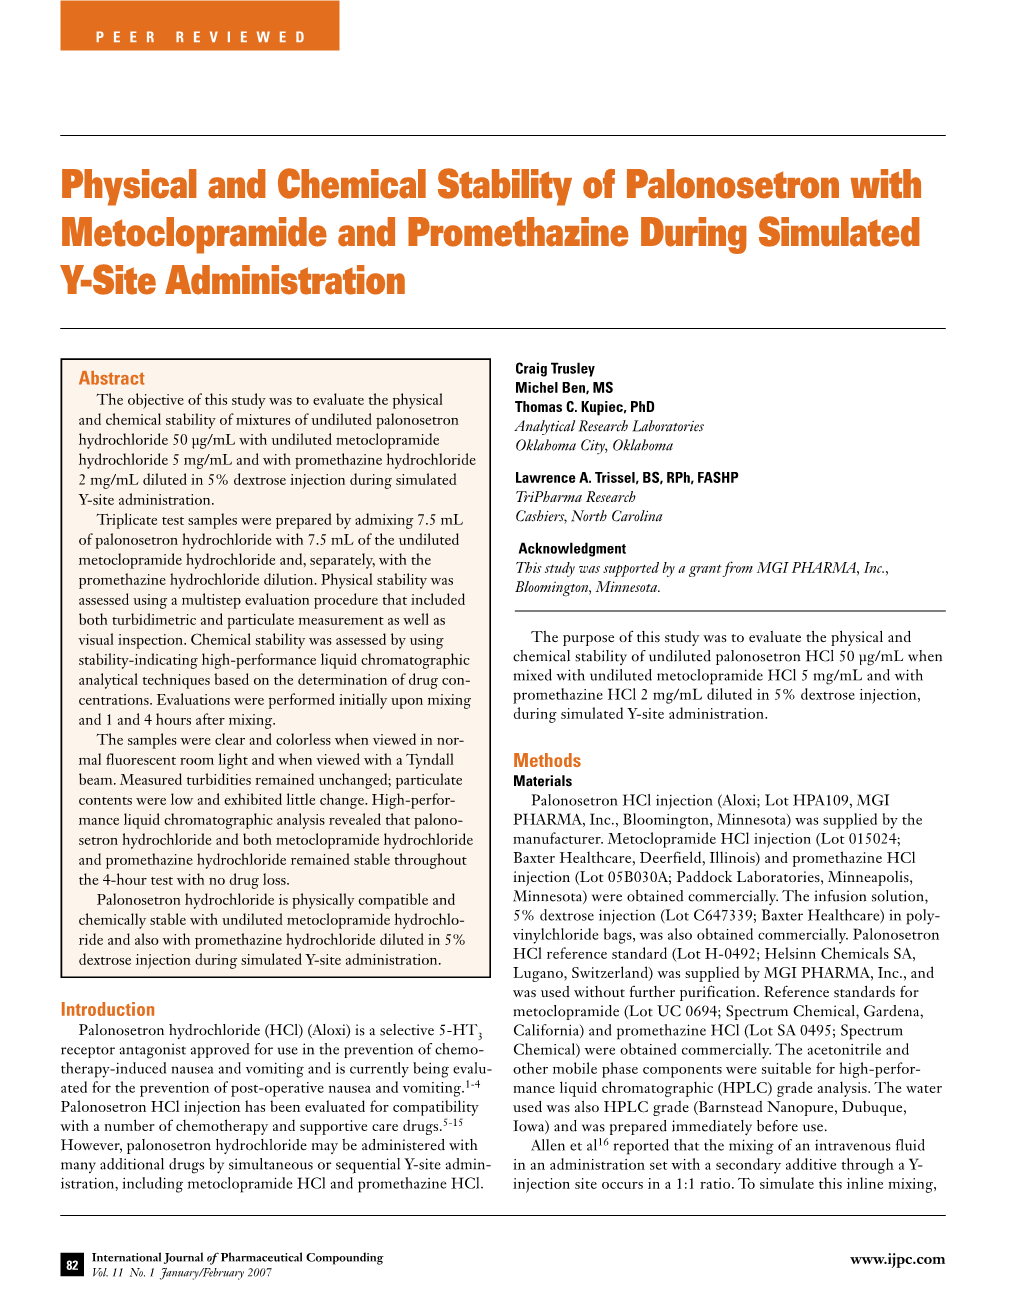 Physical and Chemical Stability of Palonosetron with Metoclopramide and Promethazine During Simulated Y-Site Administration